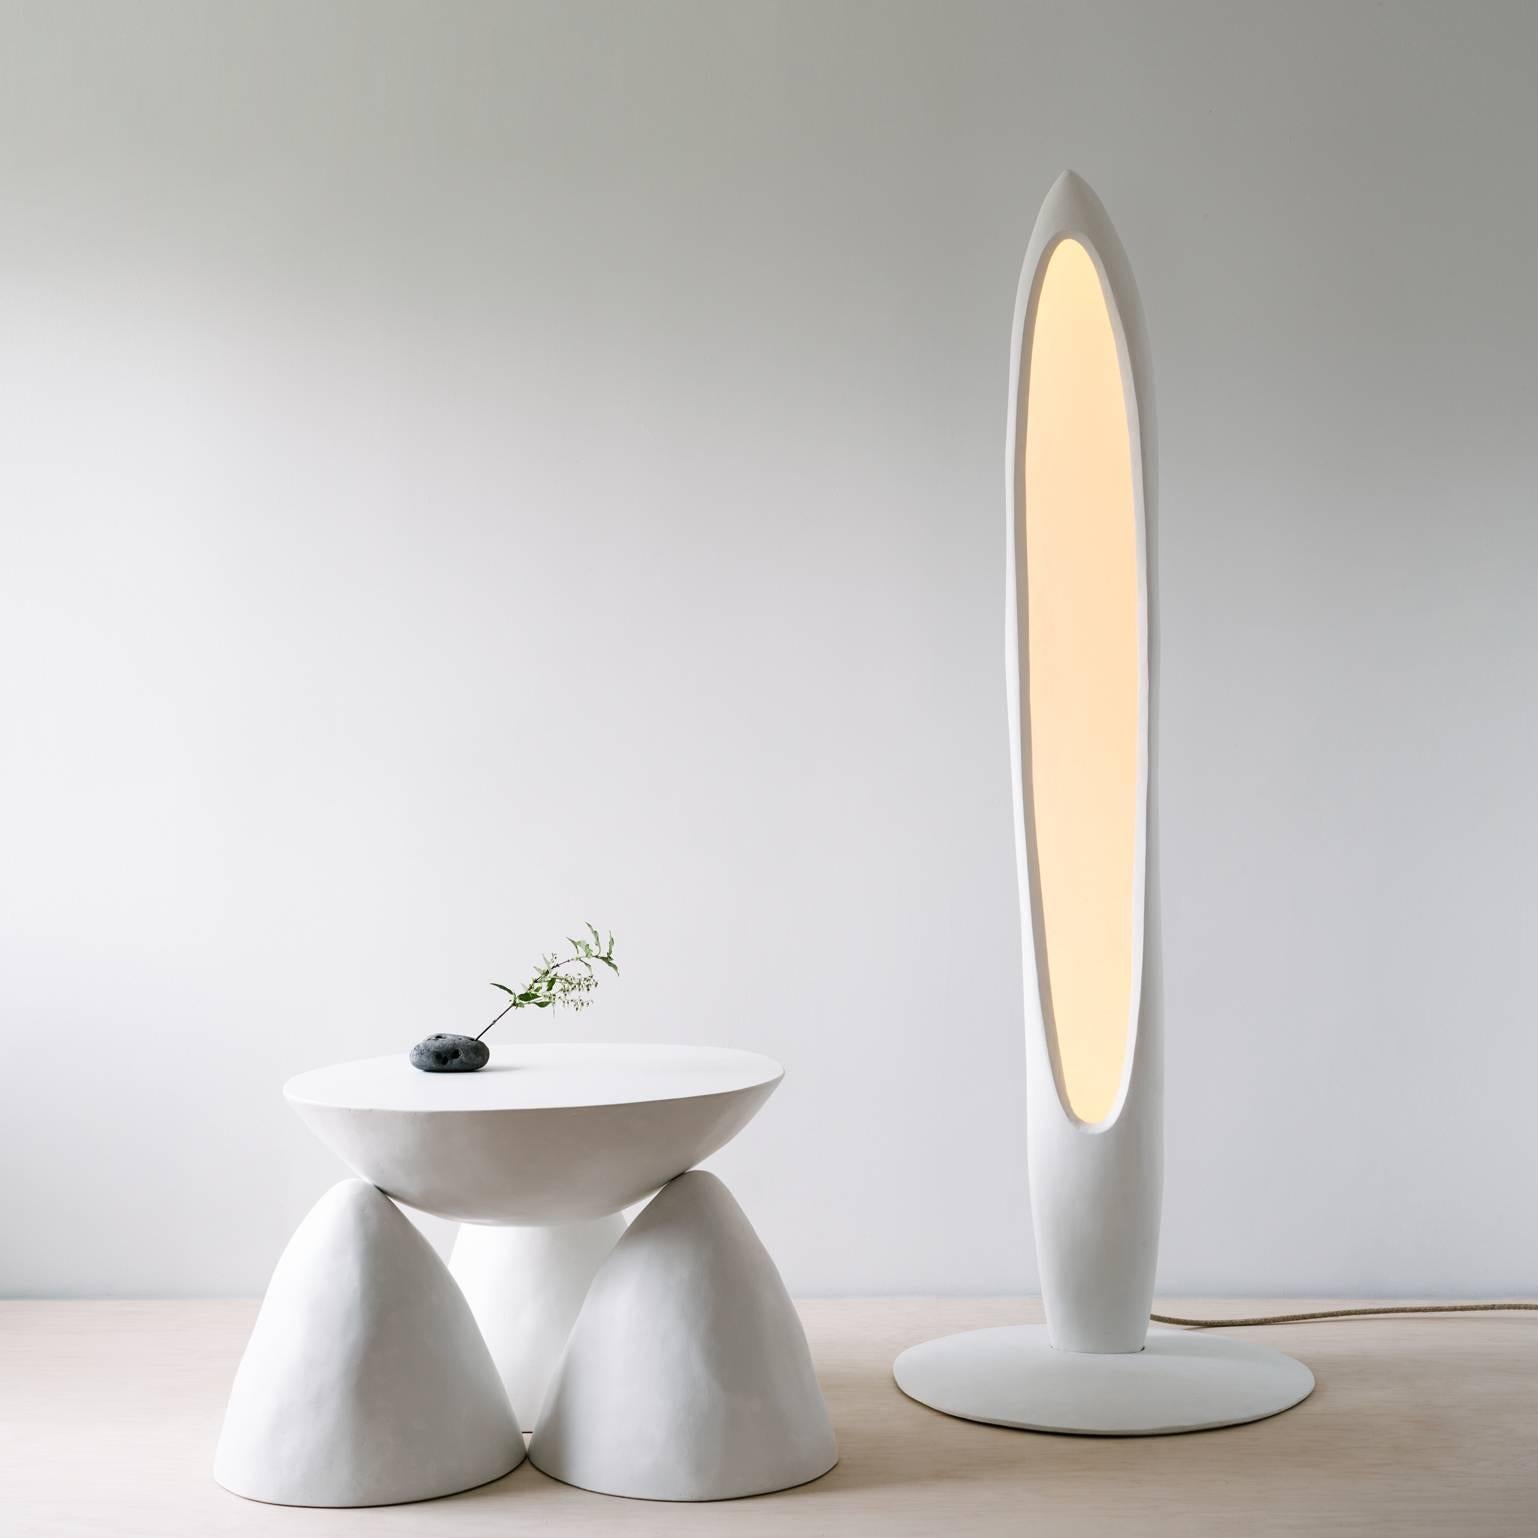 The Oyyo floor lamp is initially cast in plaster and then carved by hand and sealed with lime. 

Its hollow interior has a roughly carved surface with a hidden, dimmable, 3000K LED track which operates remotely with a controller or via phone app.